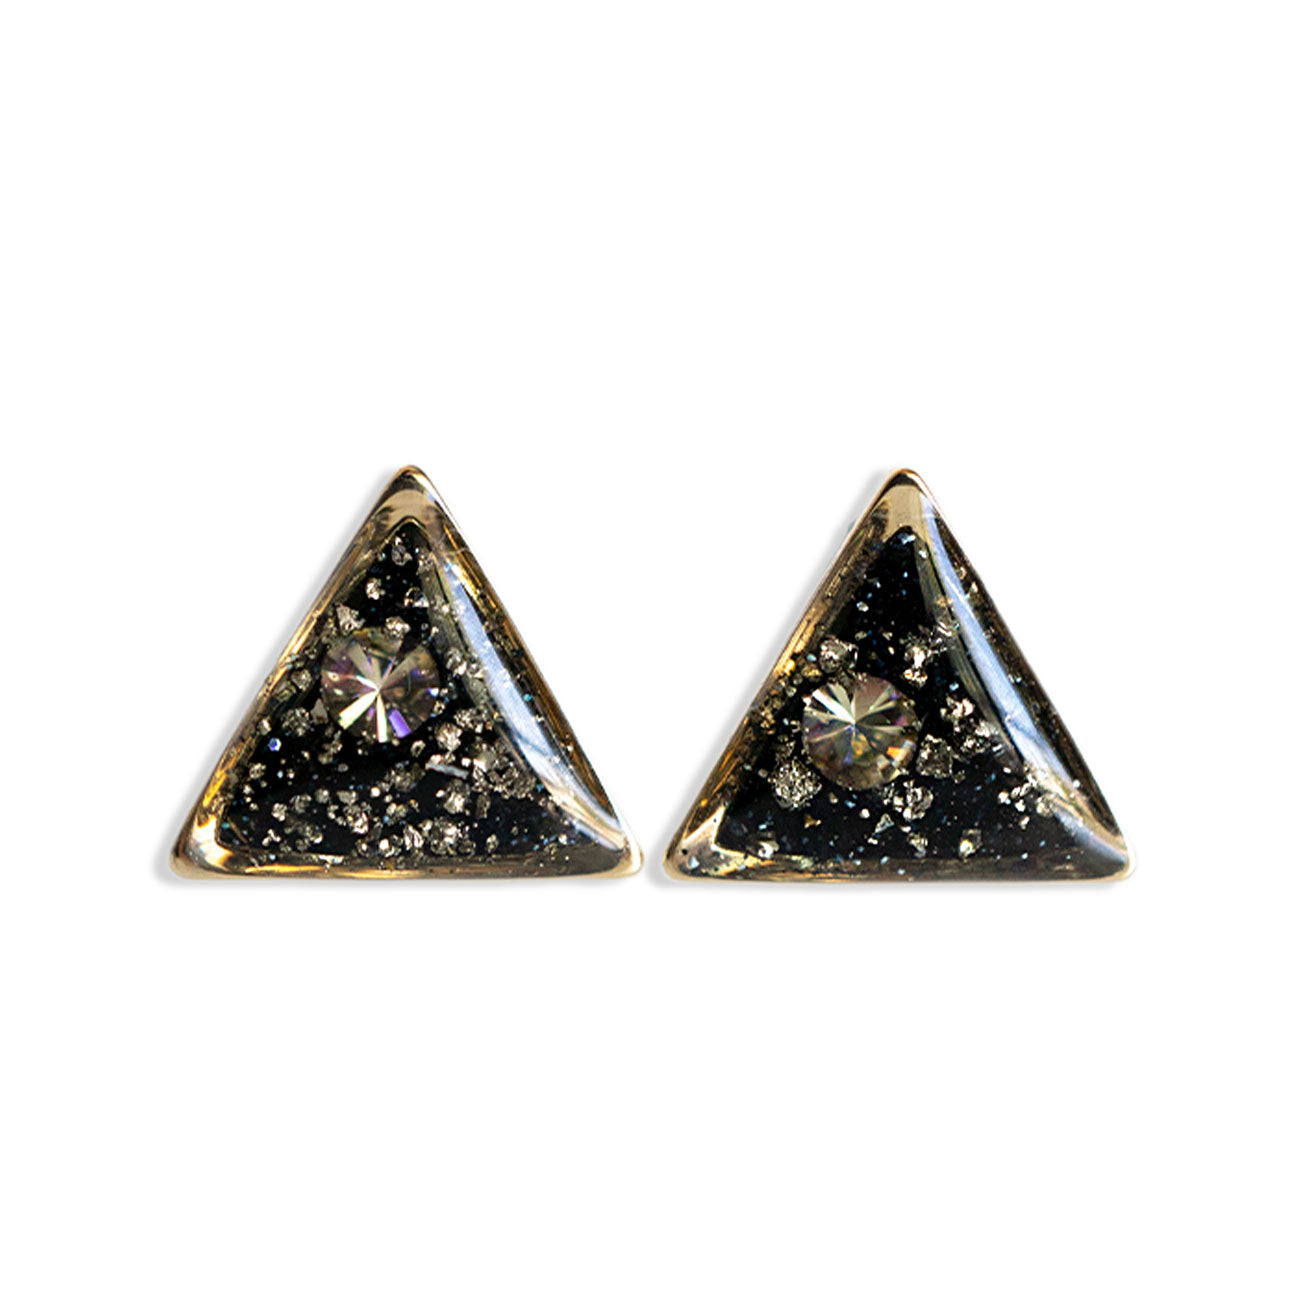 Galaxy triandle stud earrings with crushed shimmering pyrite stones and Swarovski crystals.